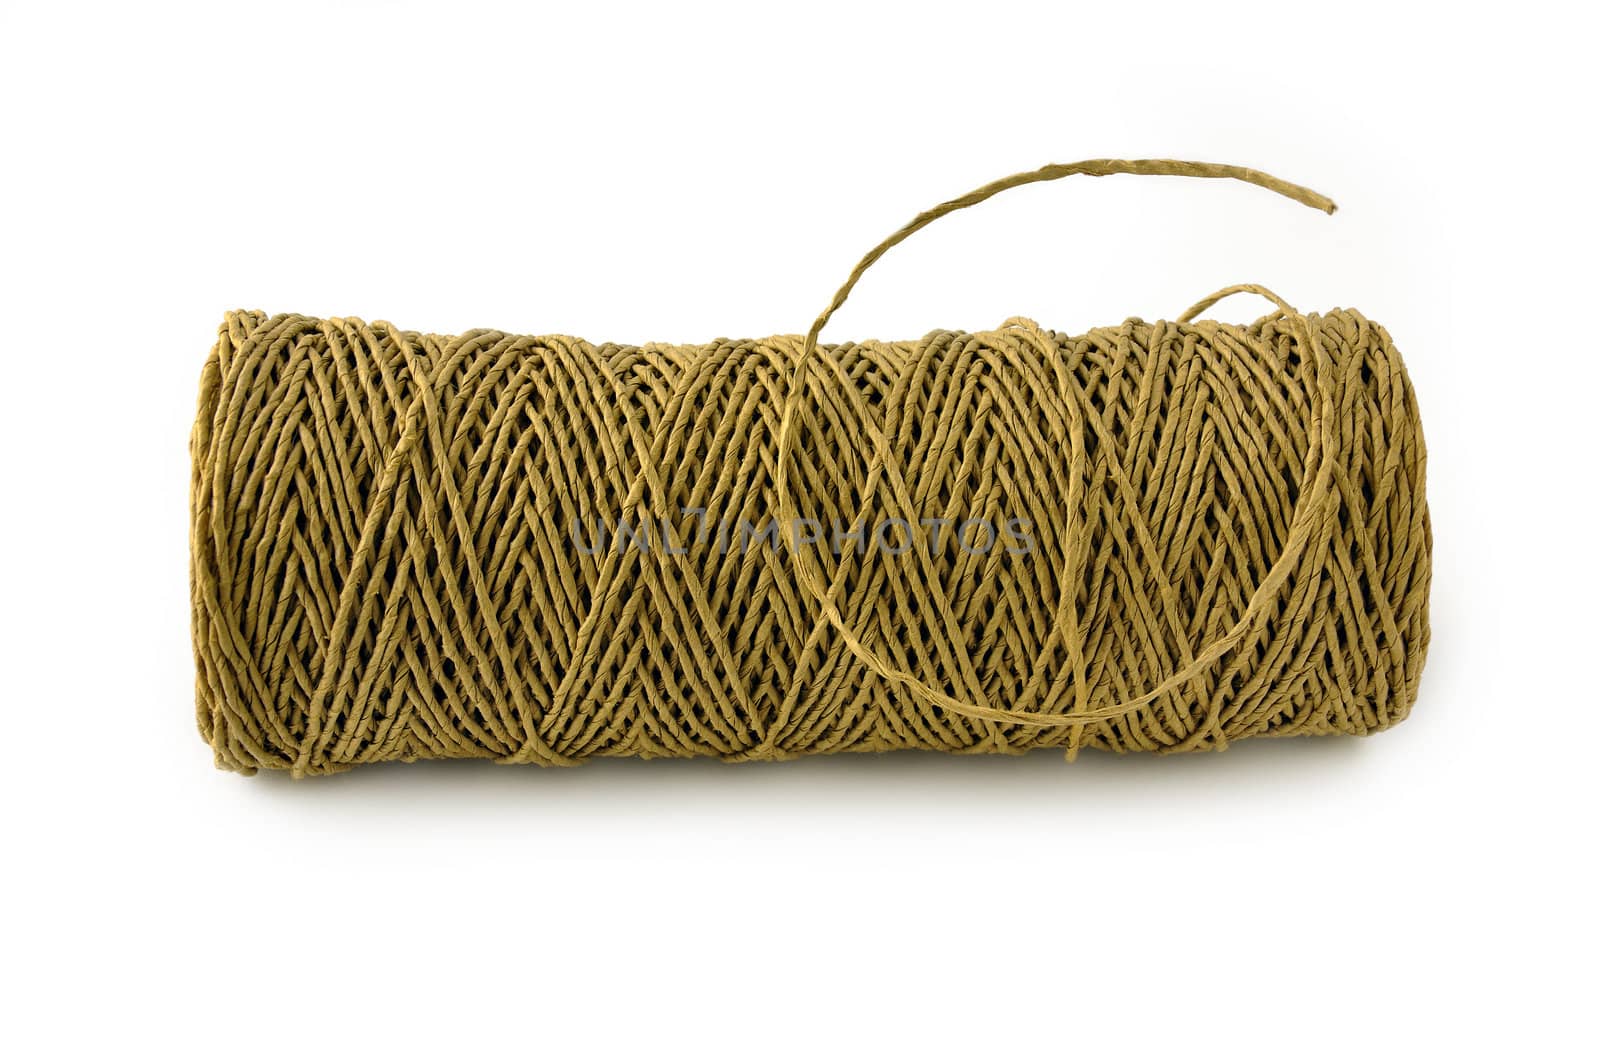 Hank of brown paper rope isolated on white background.